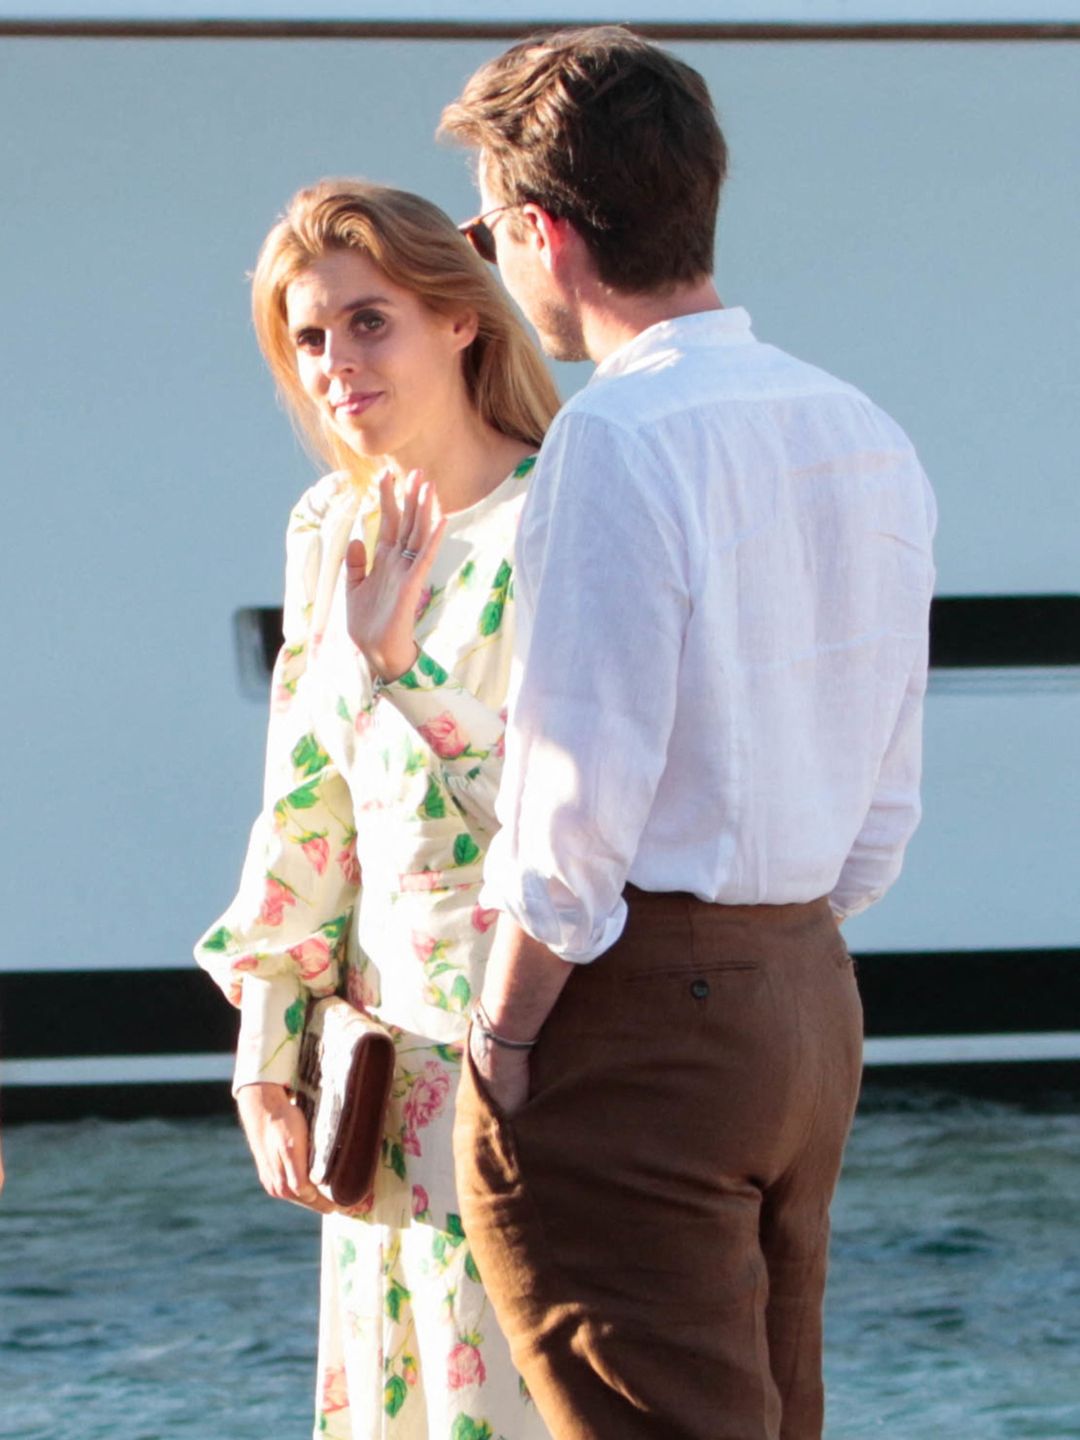 Princess Beatrice and Edoardo Mapelli Mozzi waited for a boat after dining at Le Club 55